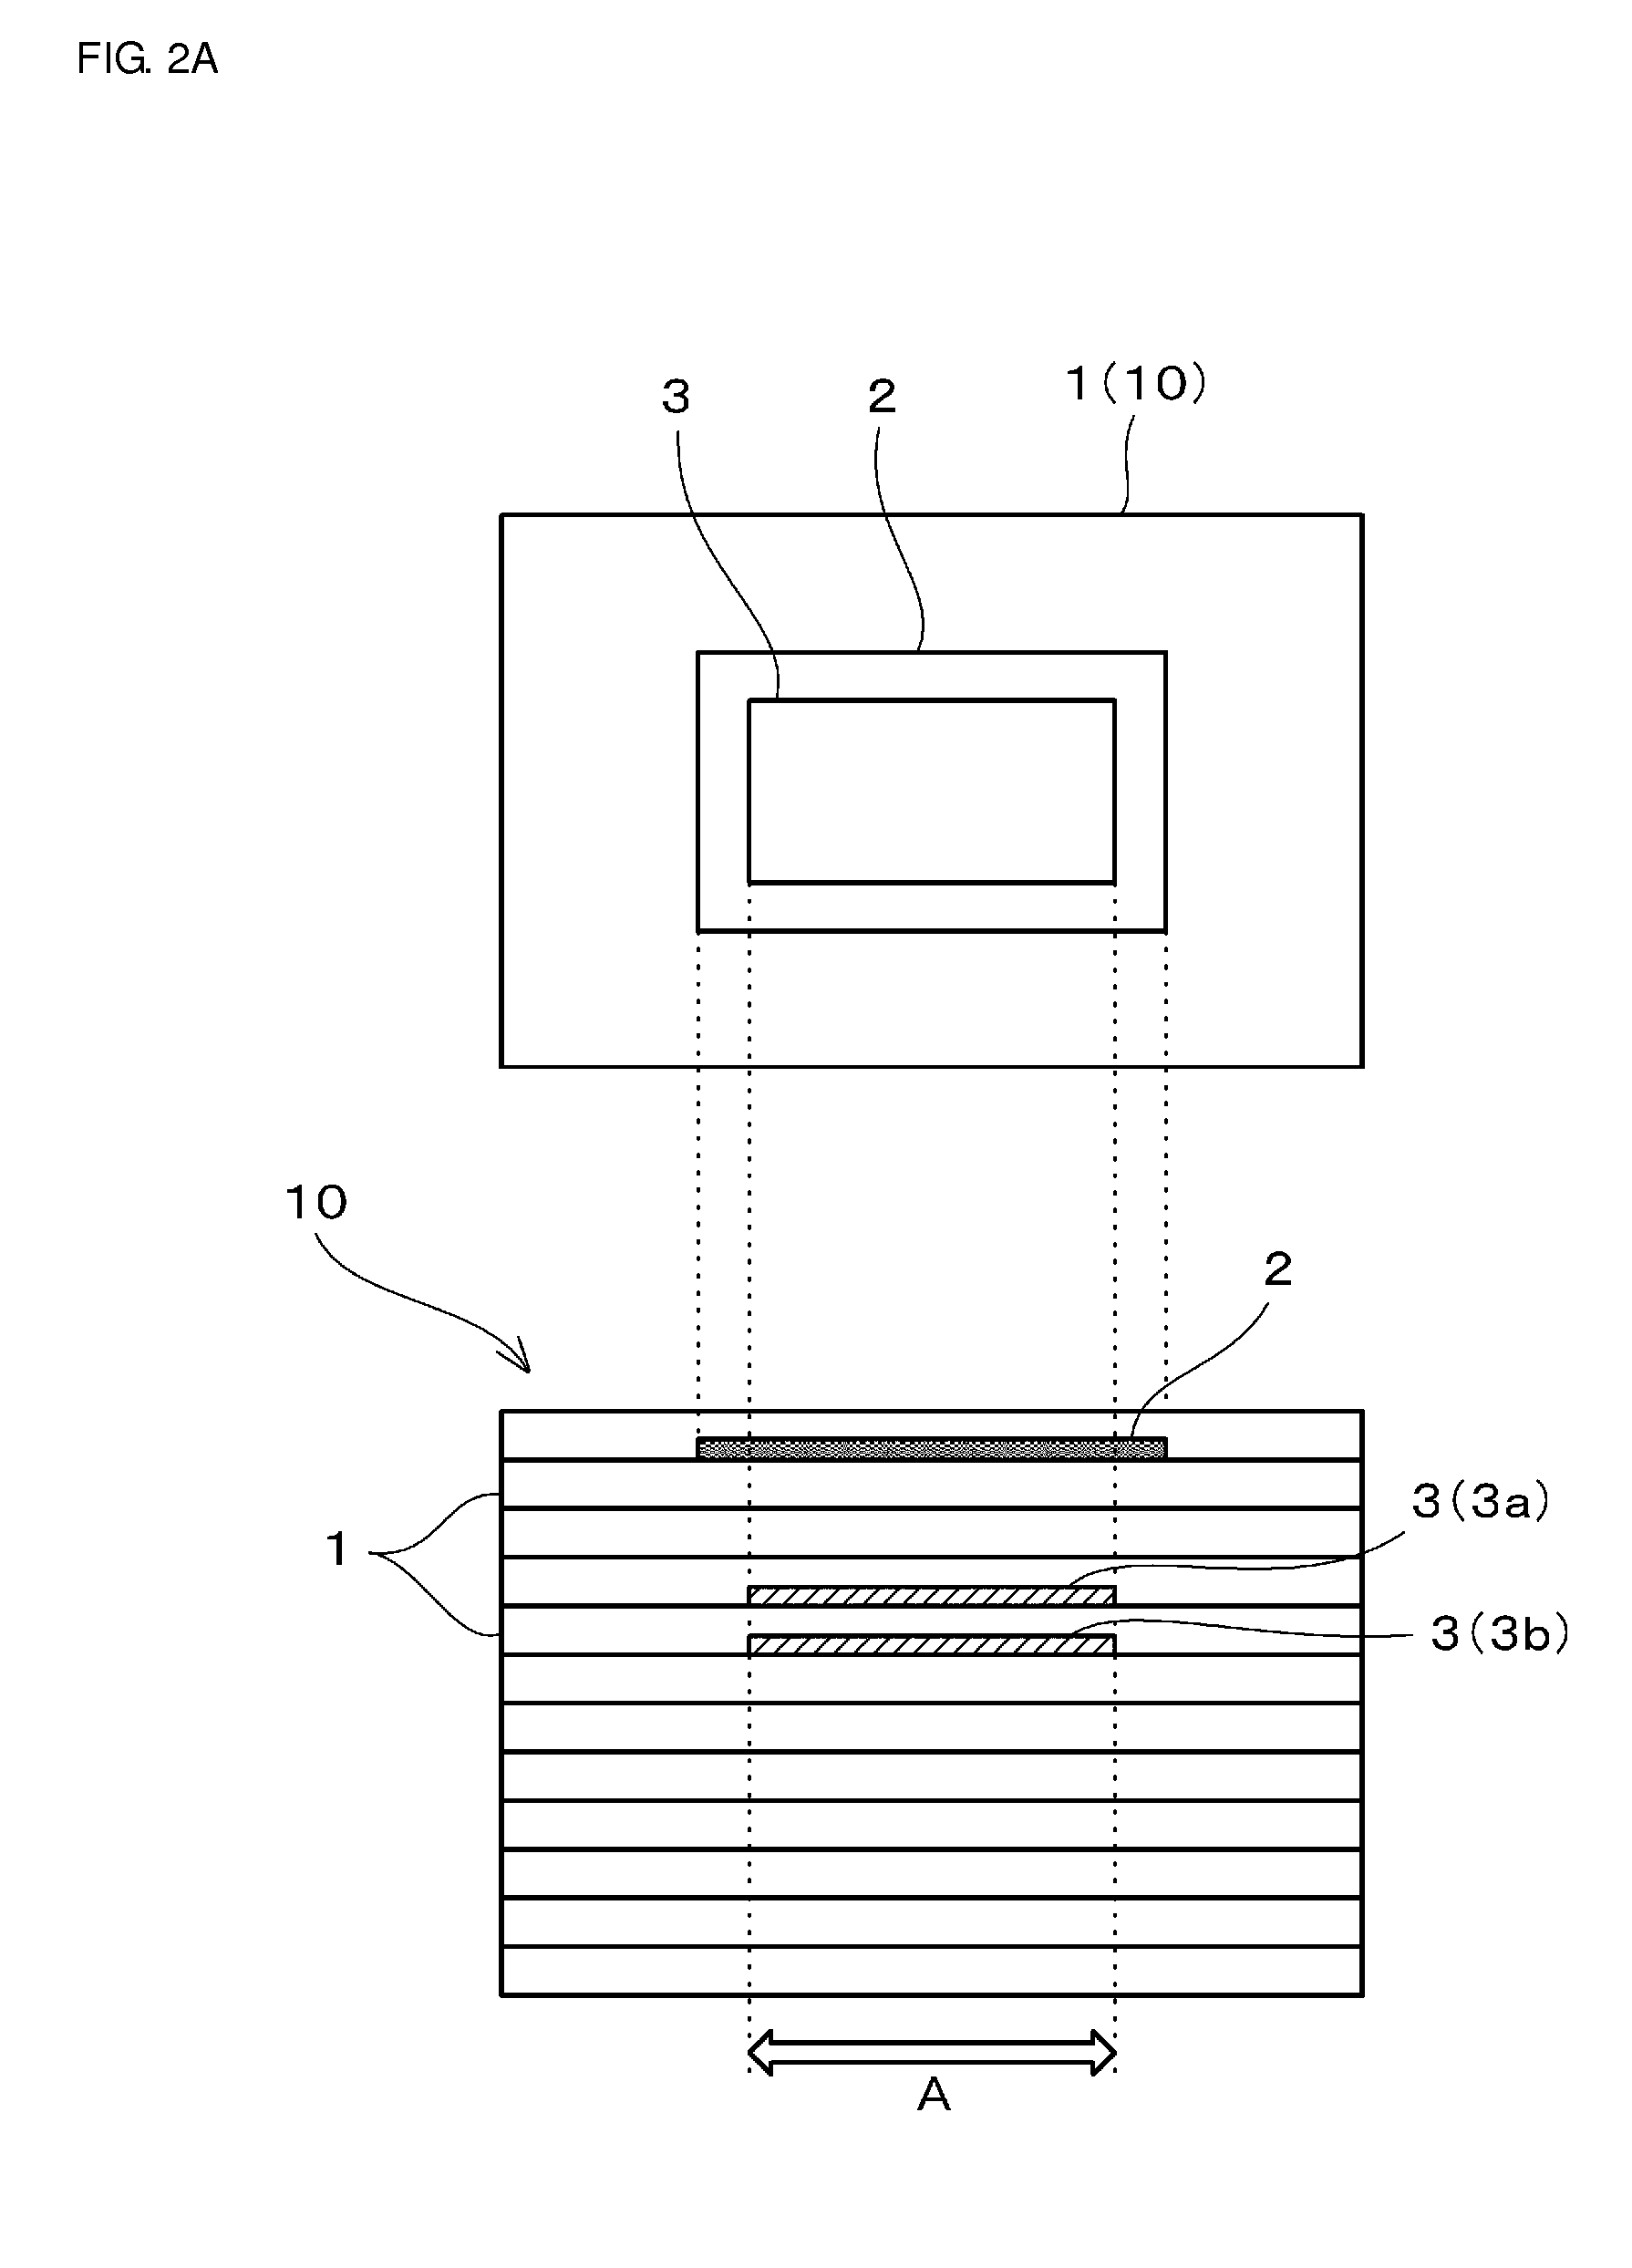 Ceramic multilayer substrate and method for manufacturing the same